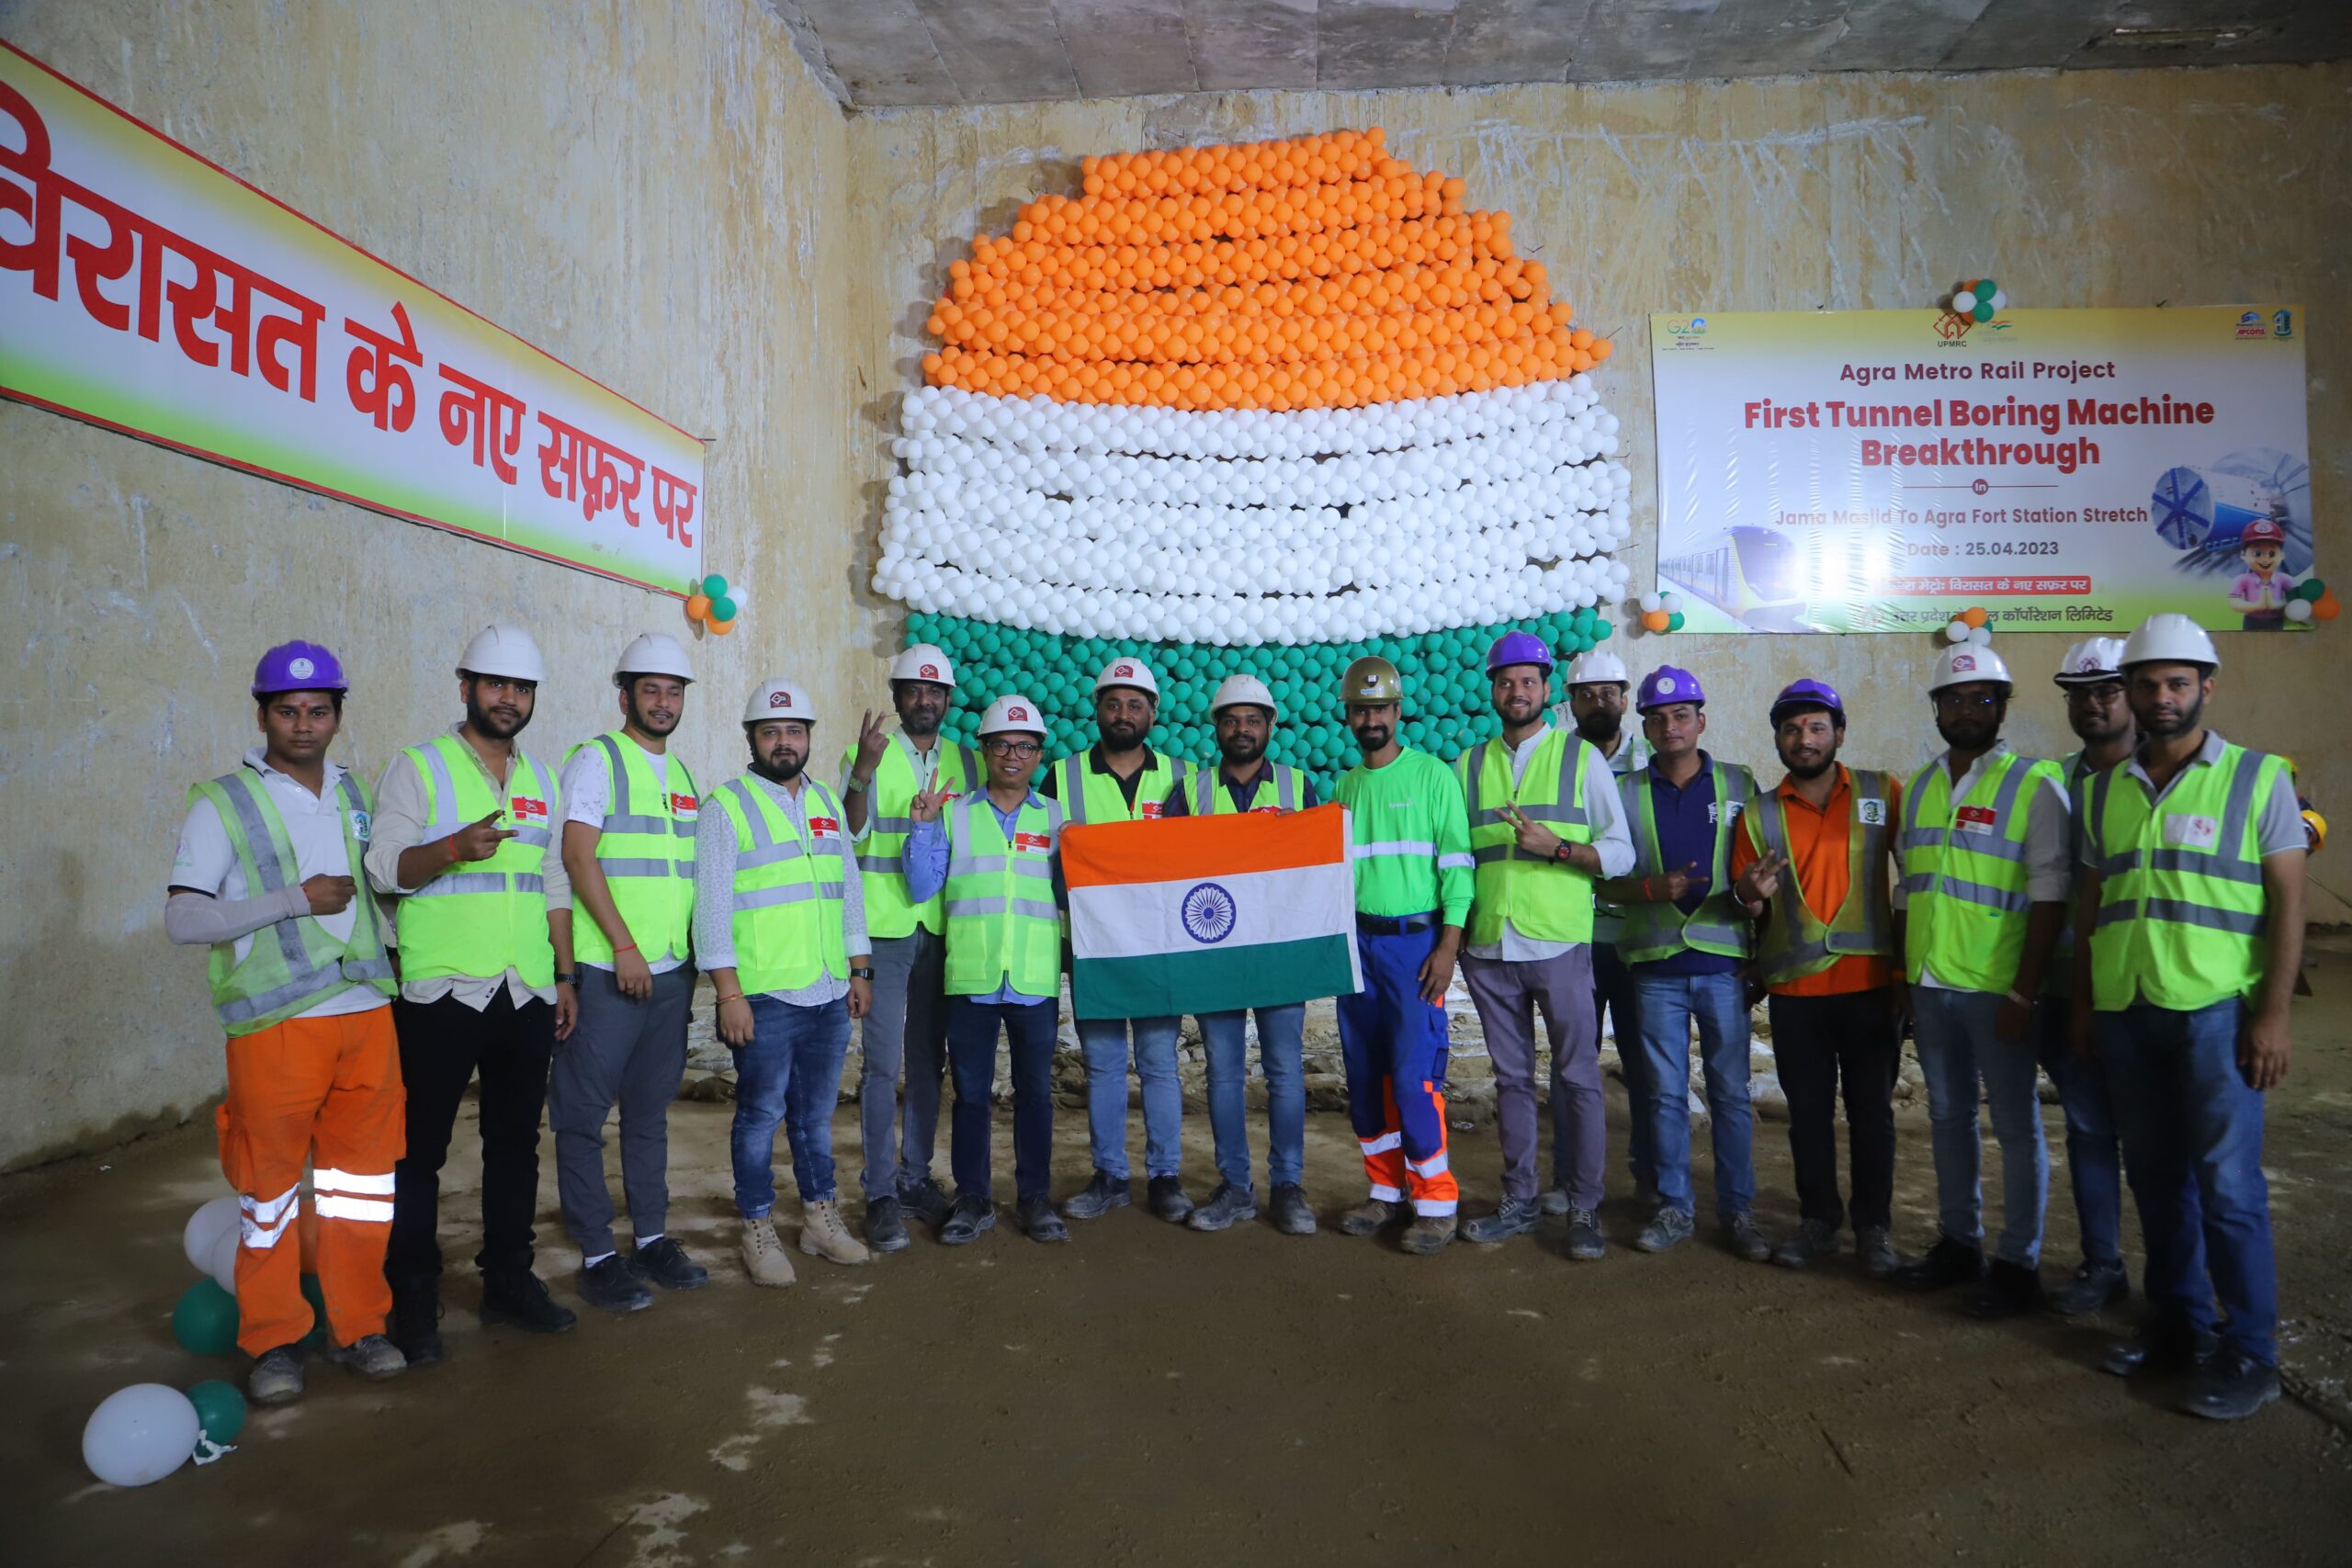 The crew anticipate the first breakthrough of the Robbins EPB at Agra Metro.